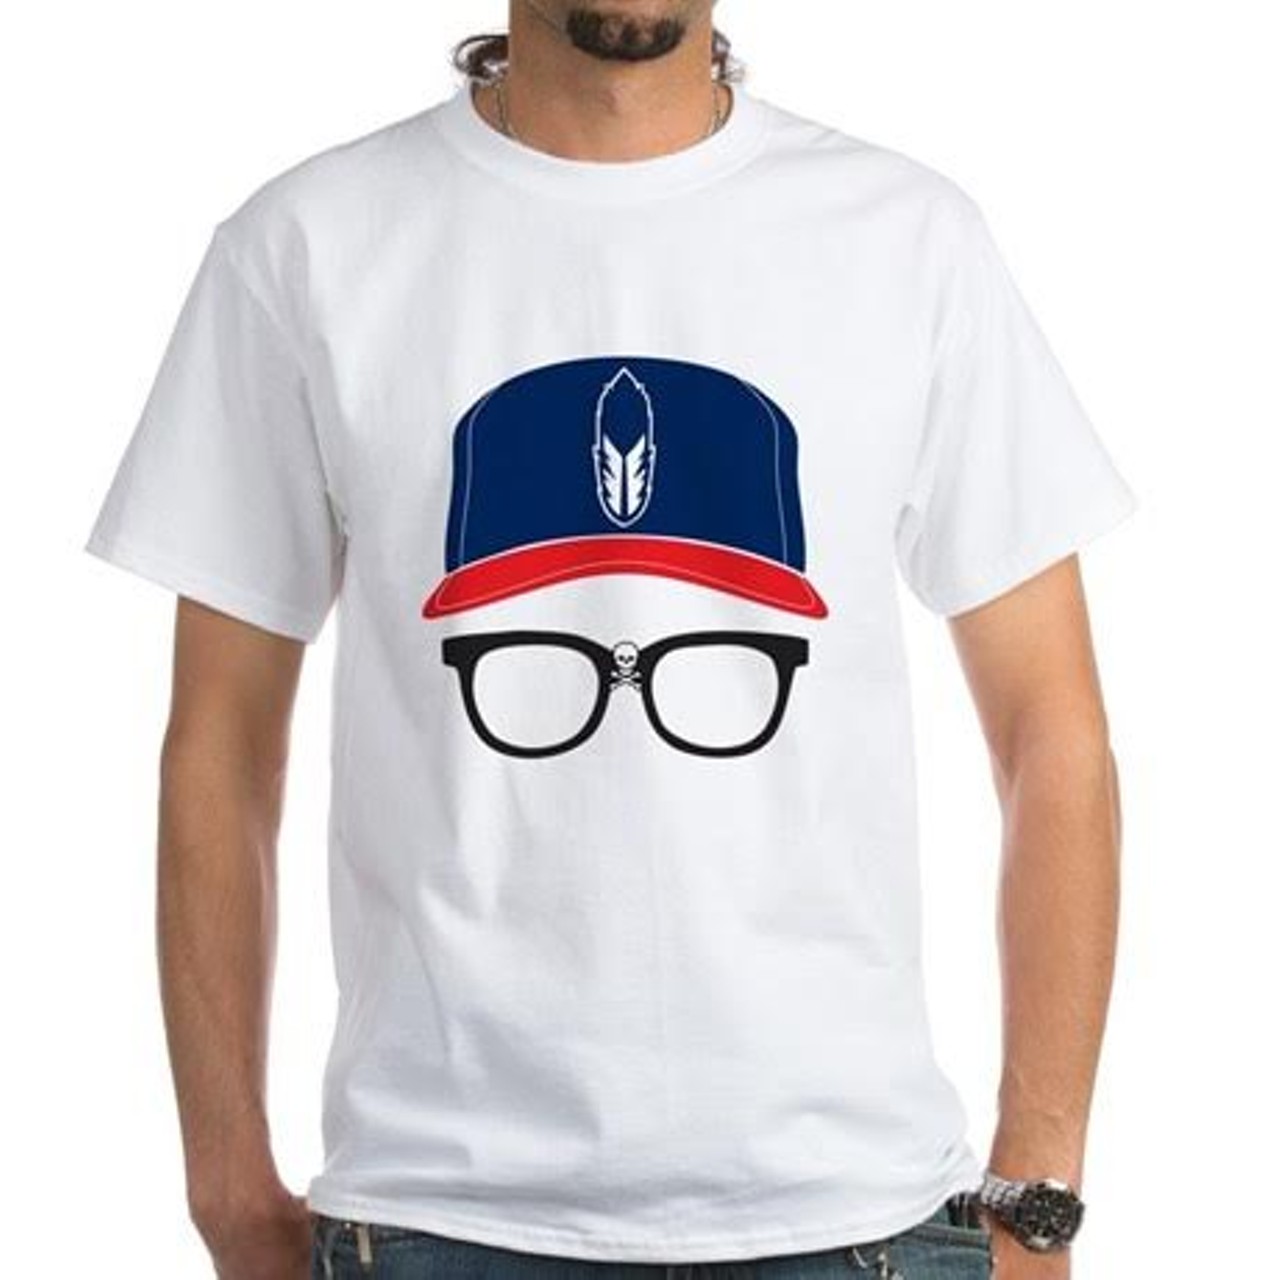 Ricky Vaughn T-shirt - $18.95
There are plenty of terrific ways to express Cleveland sports pride. (Whether you really want to is another conversation entirely.) We suggest, however, that you go a bit off-kilter for your Tribe-loving family members. Go way back, to a fictional time when a haphazard Indians team rose above the odds and changed the way the game was played. At the heart of that little tale? One Ricky Vaughn. Wild Thing. Sheen. Cafe Press is slinging a great tee that features Vaughn&#146;s iconic skull-and-crossbones-adorned glasses. Get yourself one while you&#146;re at it, and go sing the Tribe&#146;s praises this summer. tinyurl.com/rvaughncle